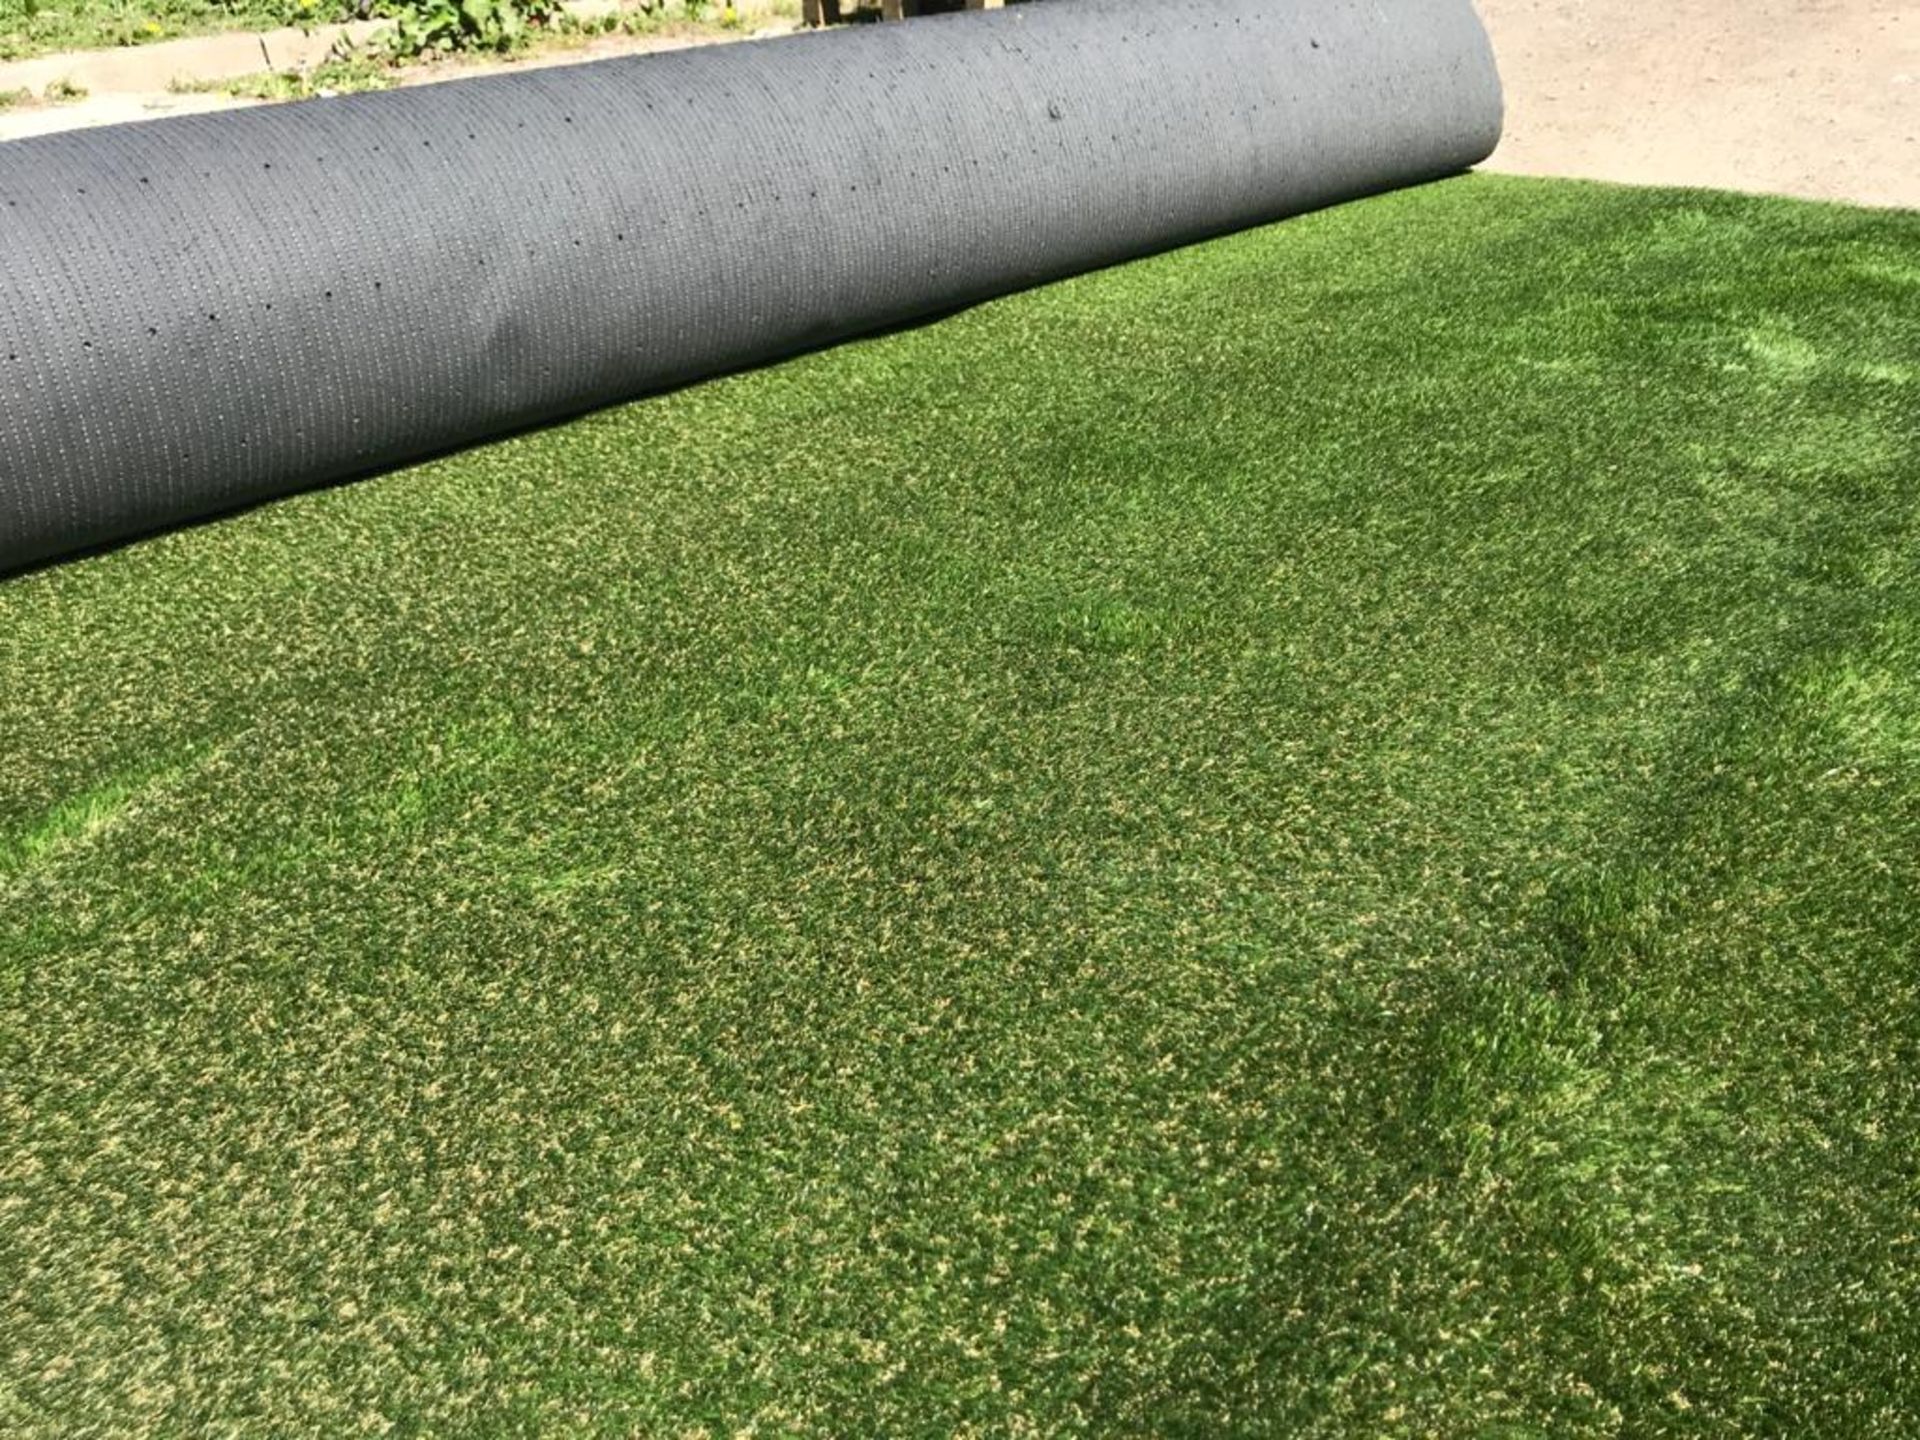 25m x4m Roll artificial grass / 35mm - Image 5 of 5